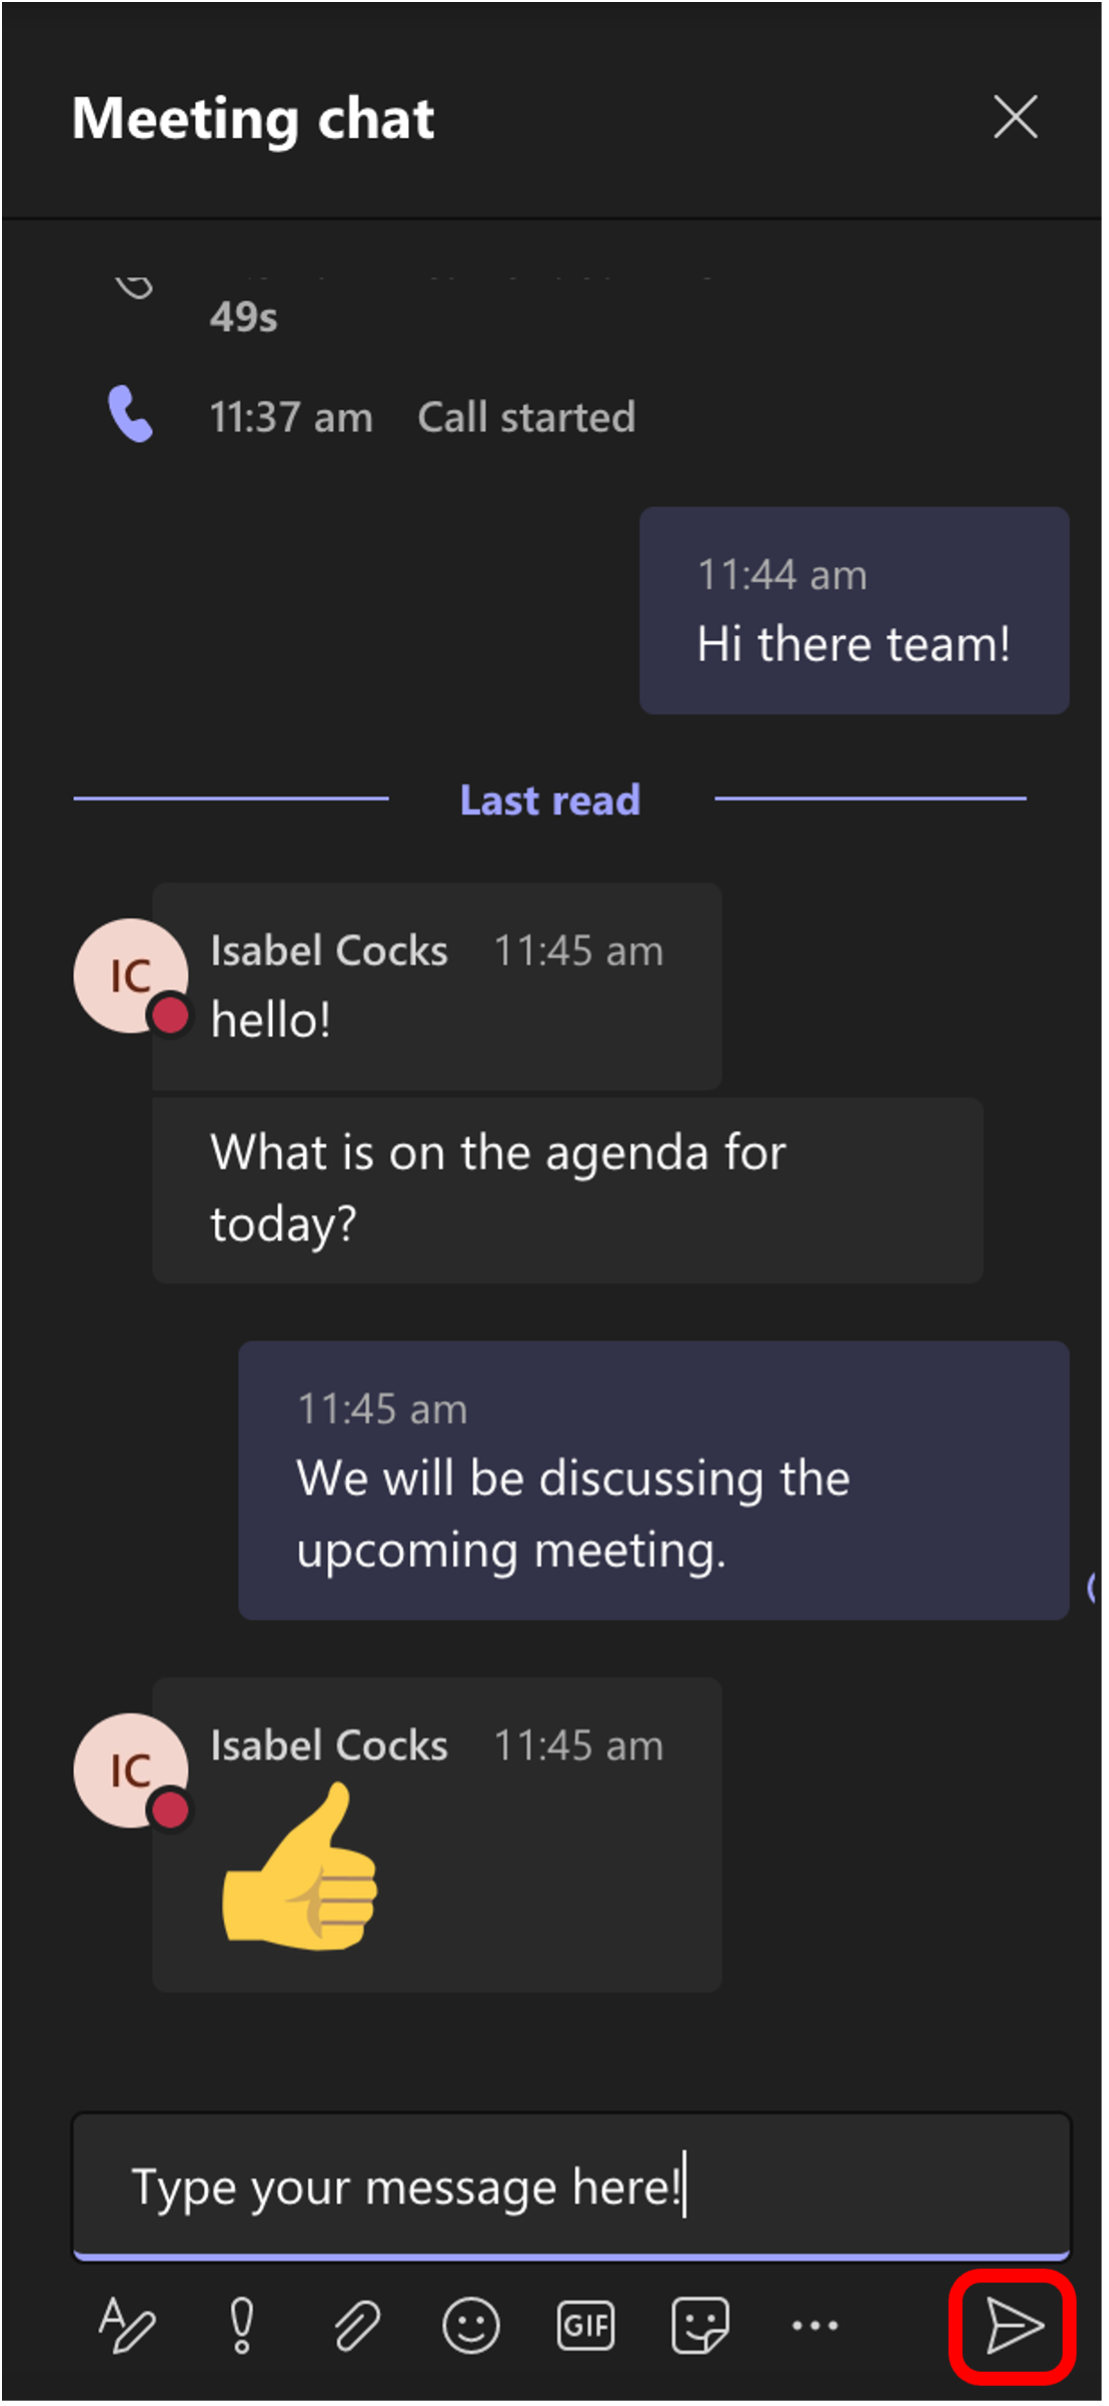 Meeting chat options